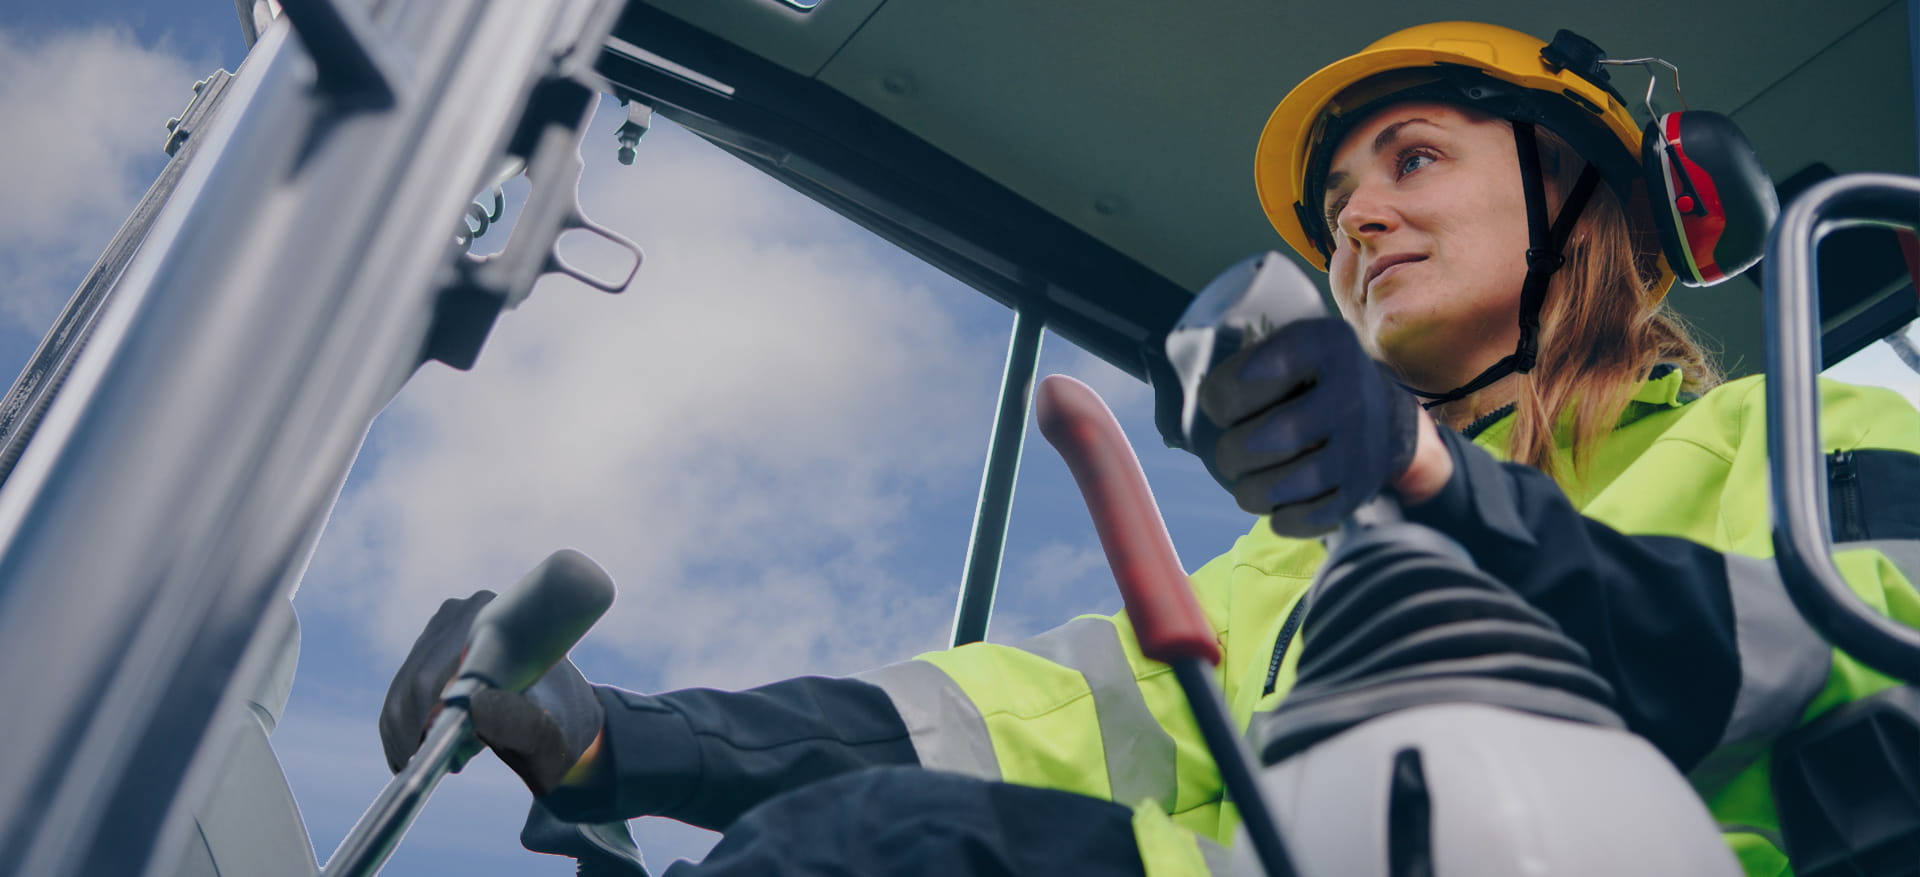 Woman operating a crane in hard hat and high vis